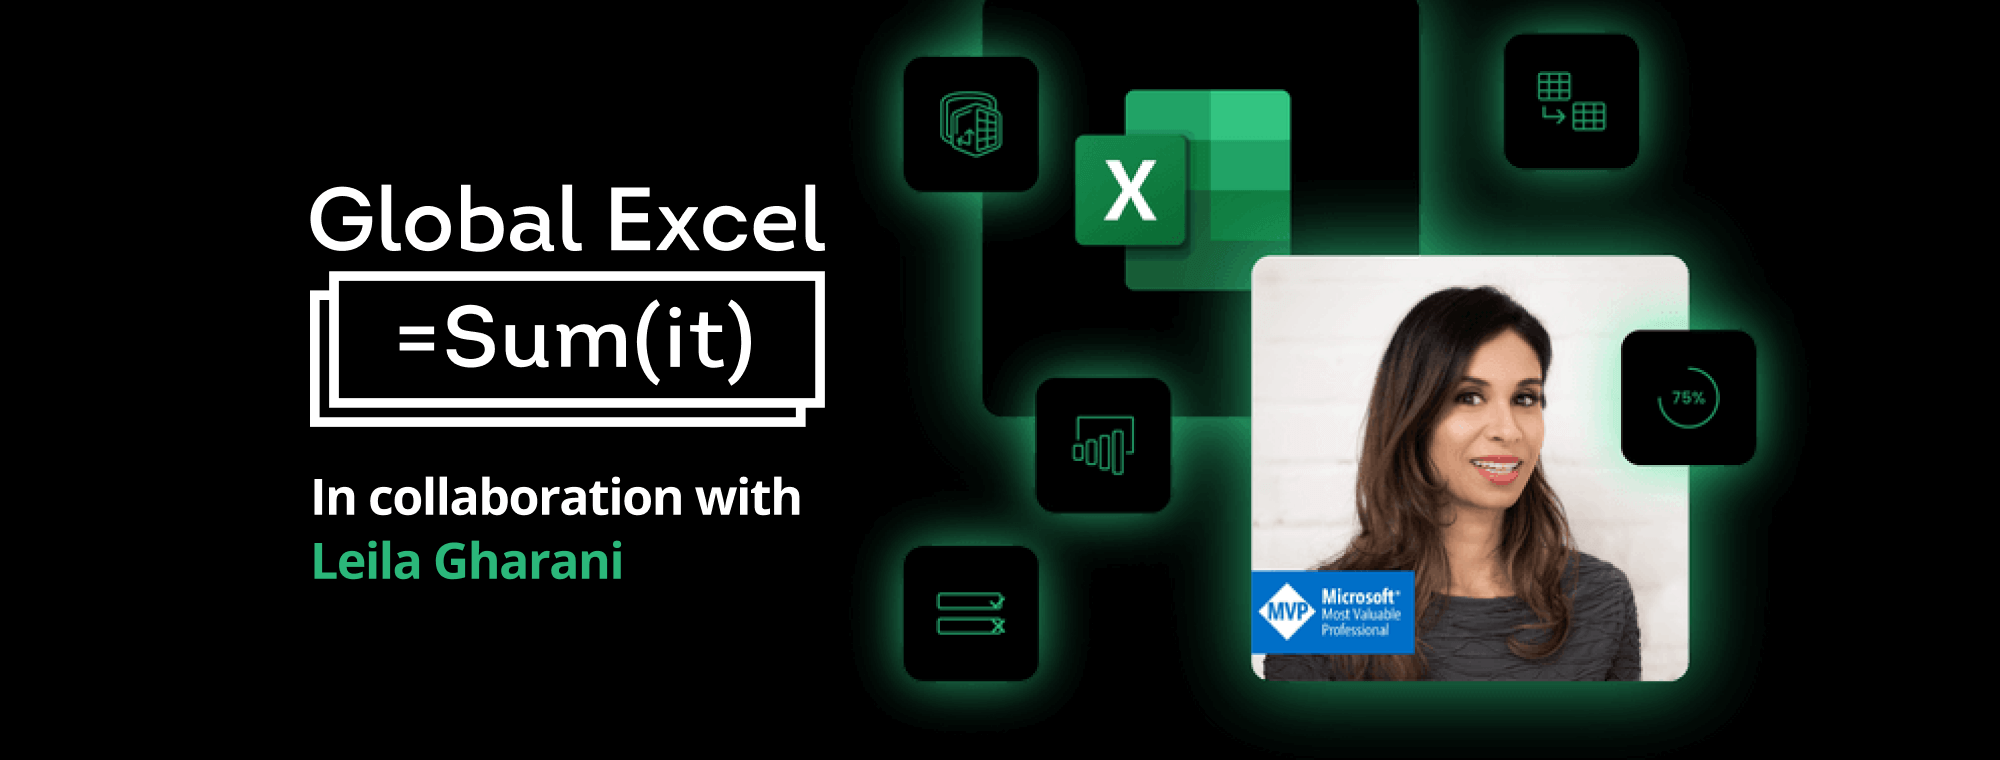 Zebra BI will be joining the Global Excel Summit, together with Leila Gharani